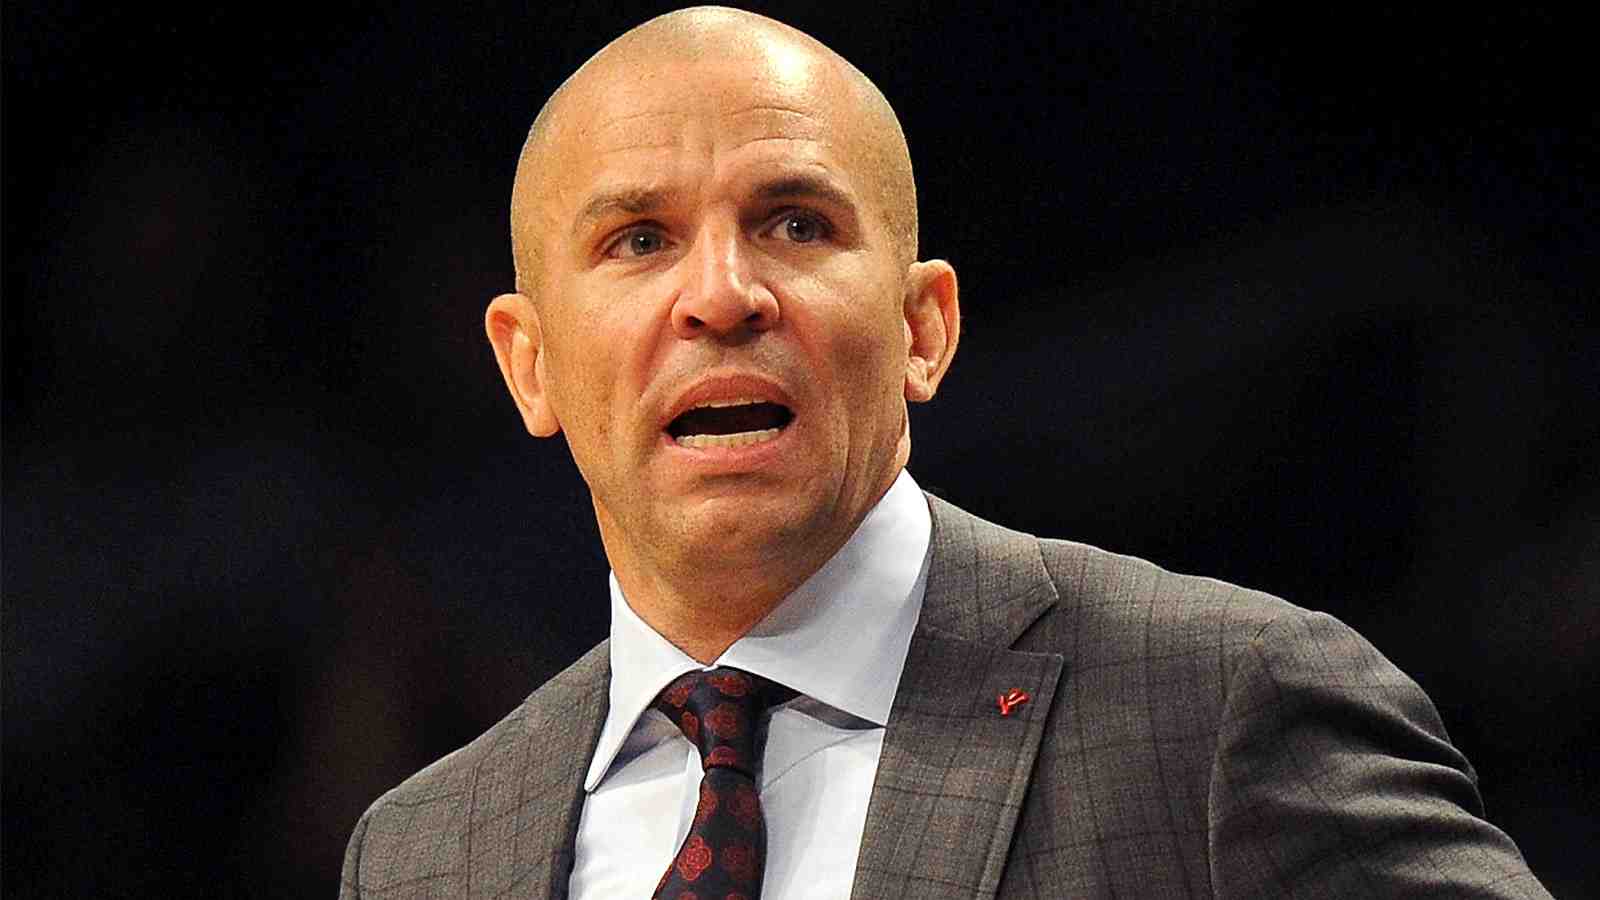 Jason Kidd - "We are going to turn this team around 360 degrees."